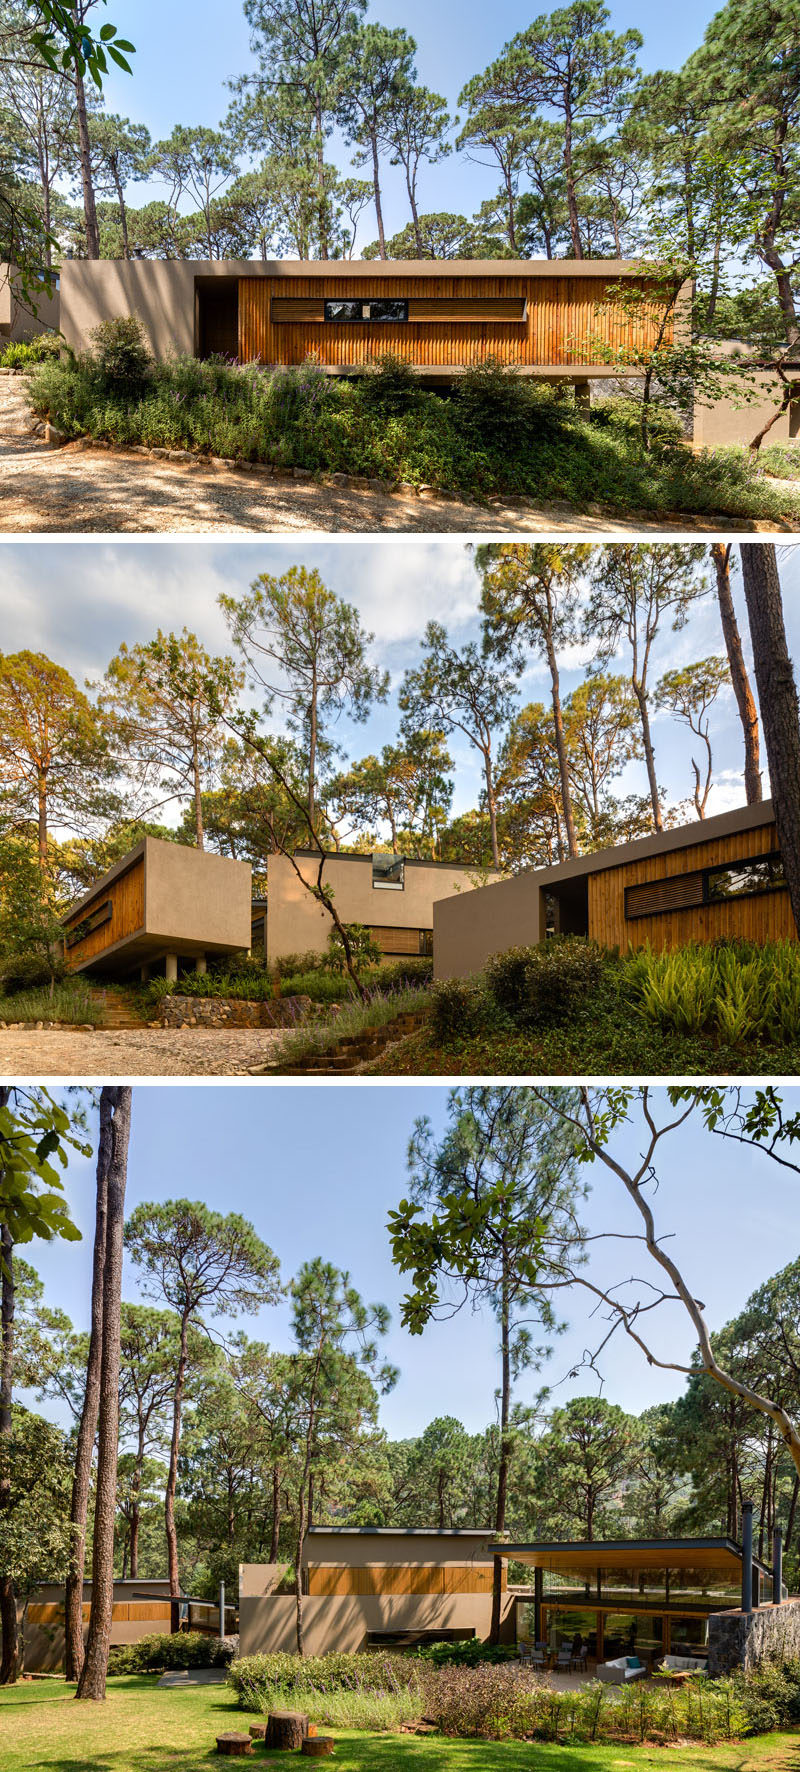 This home in Valle de Bravo, Mexico, was designed to allow the home owners to enjoy the tranquility of the surrounding forest of ancient pines and lush vegetation.